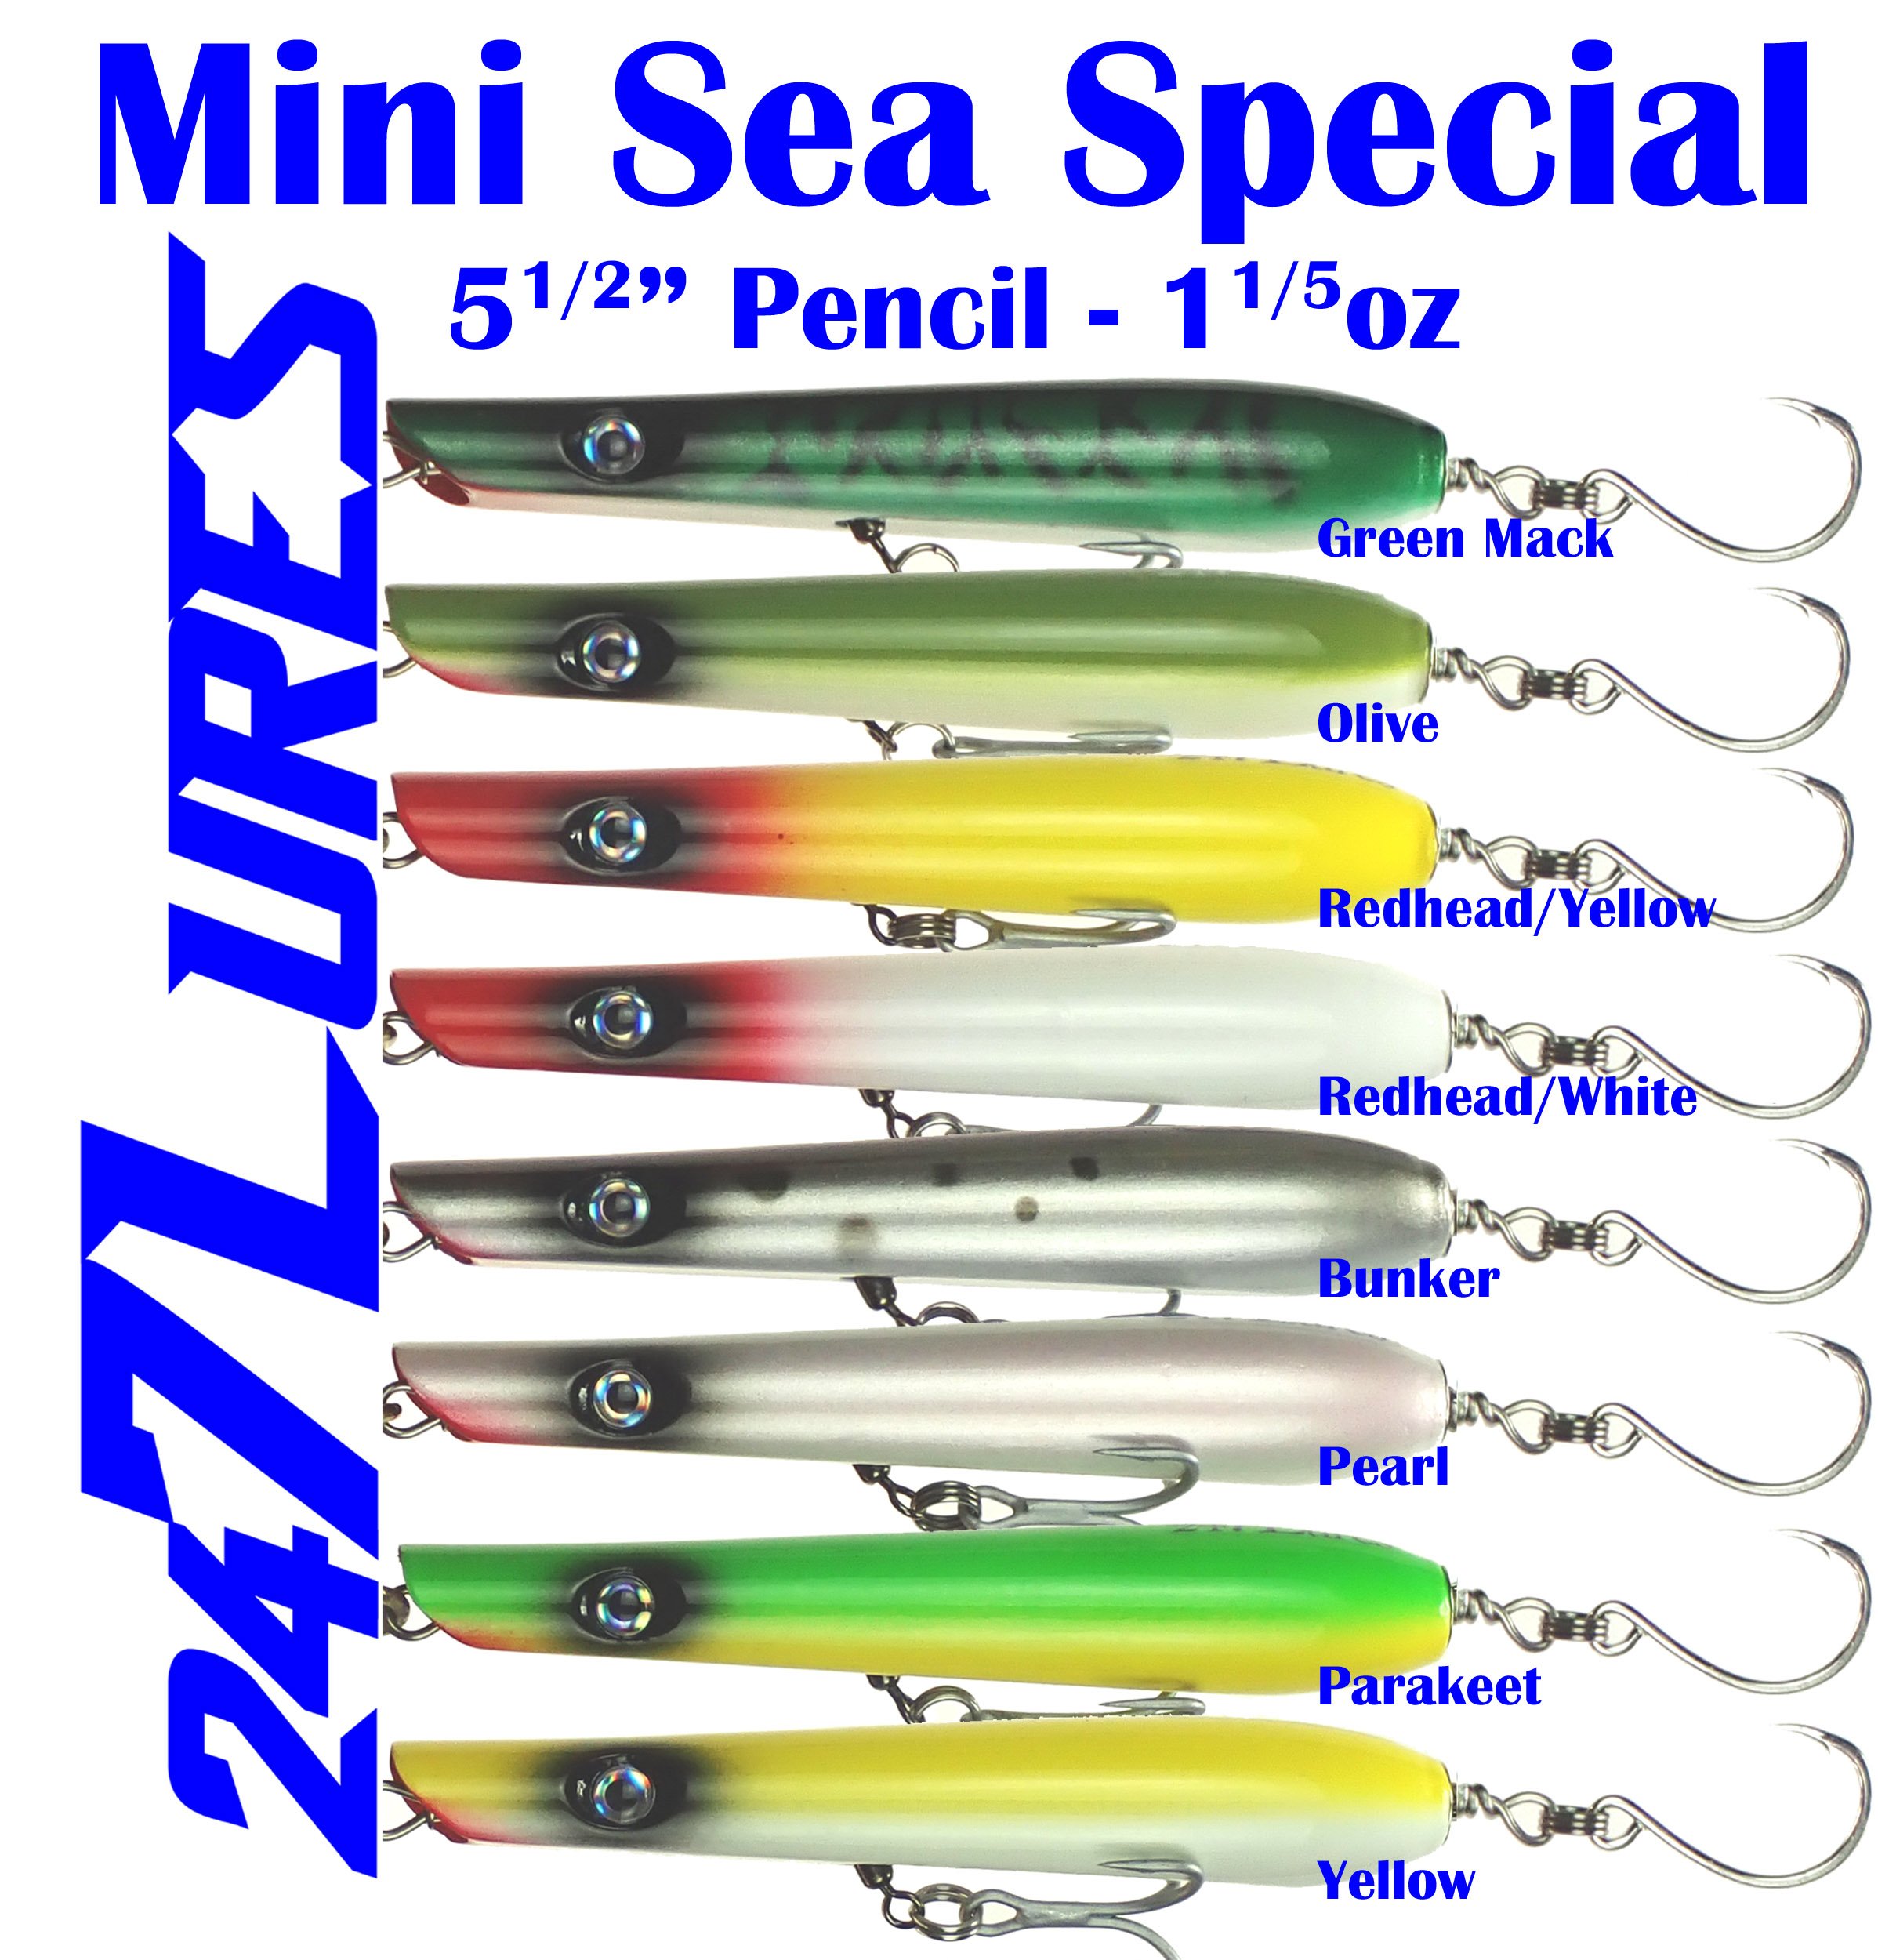 247 Lures Fish Stick Round Bottom Pencil Popper – Surfland Bait and Tackle